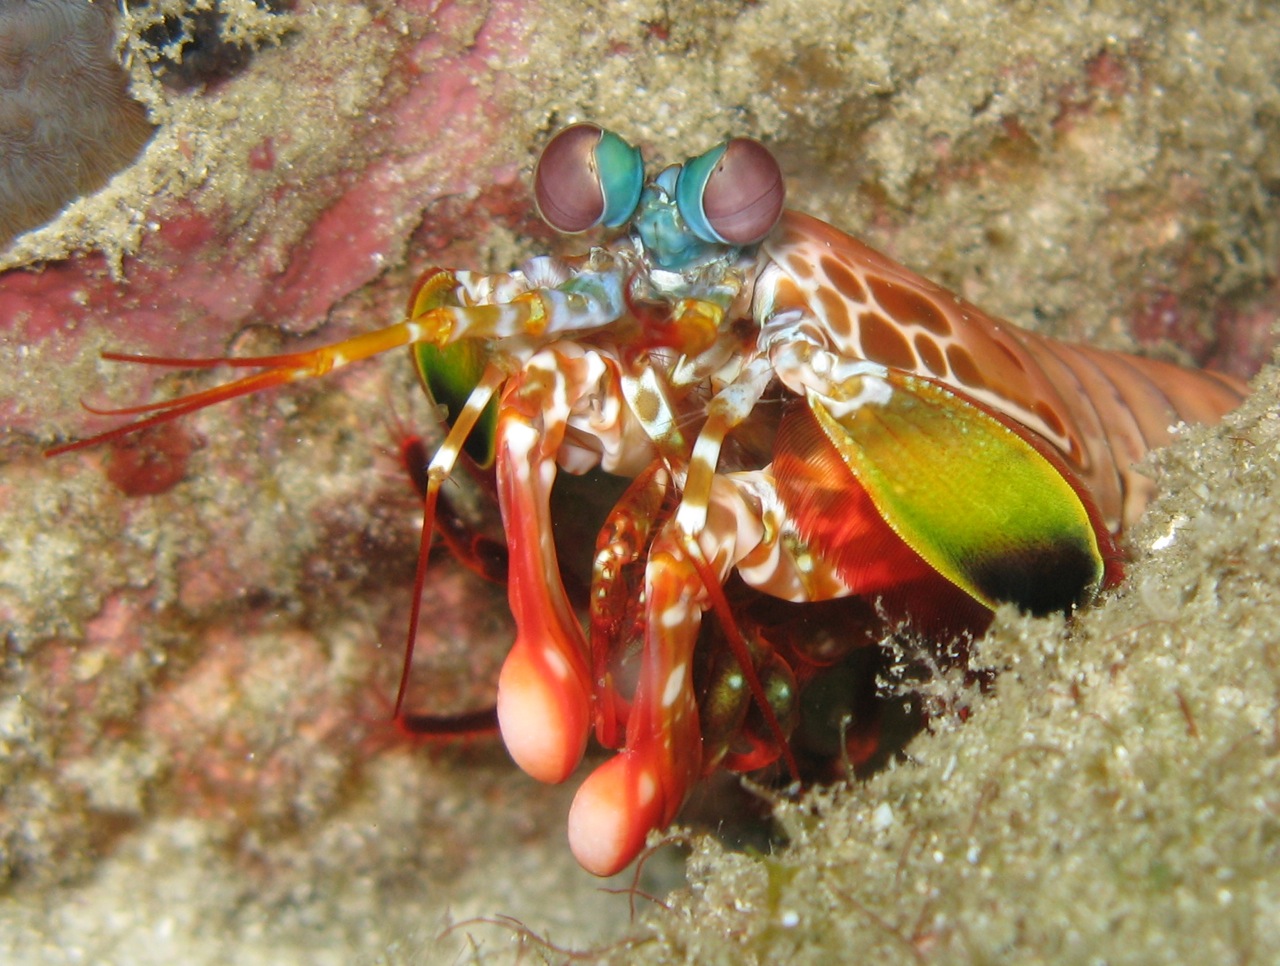 This flamboyant shrimp sees what we can't.